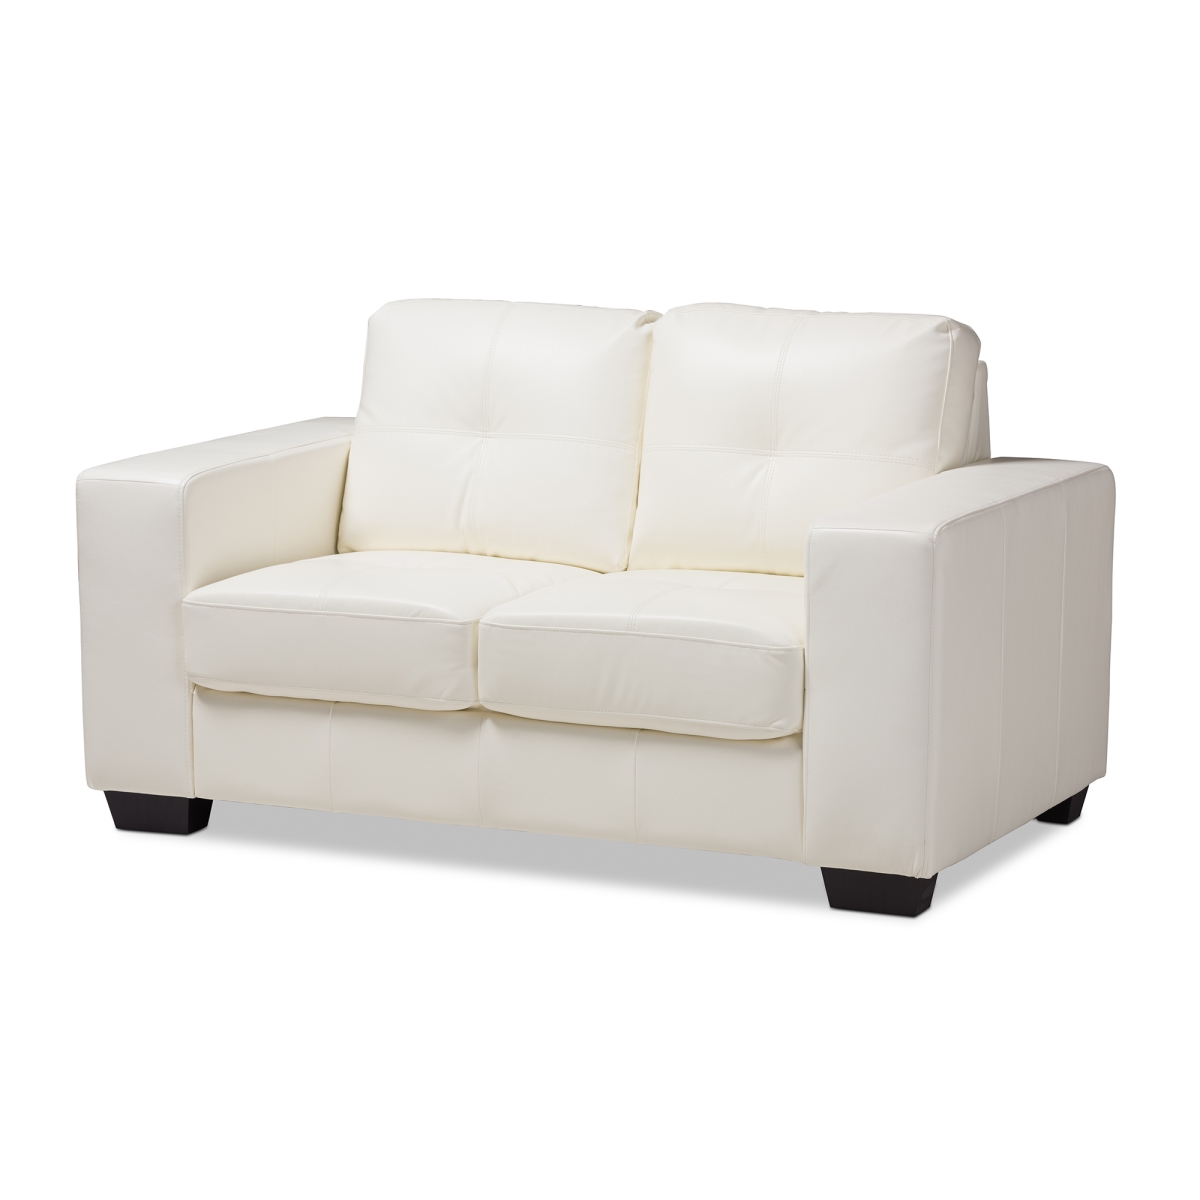 U2470-white-ls Ids06lt-ls Adalynn Modern & Contemporary White Faux Leather Upholstered Loveseat